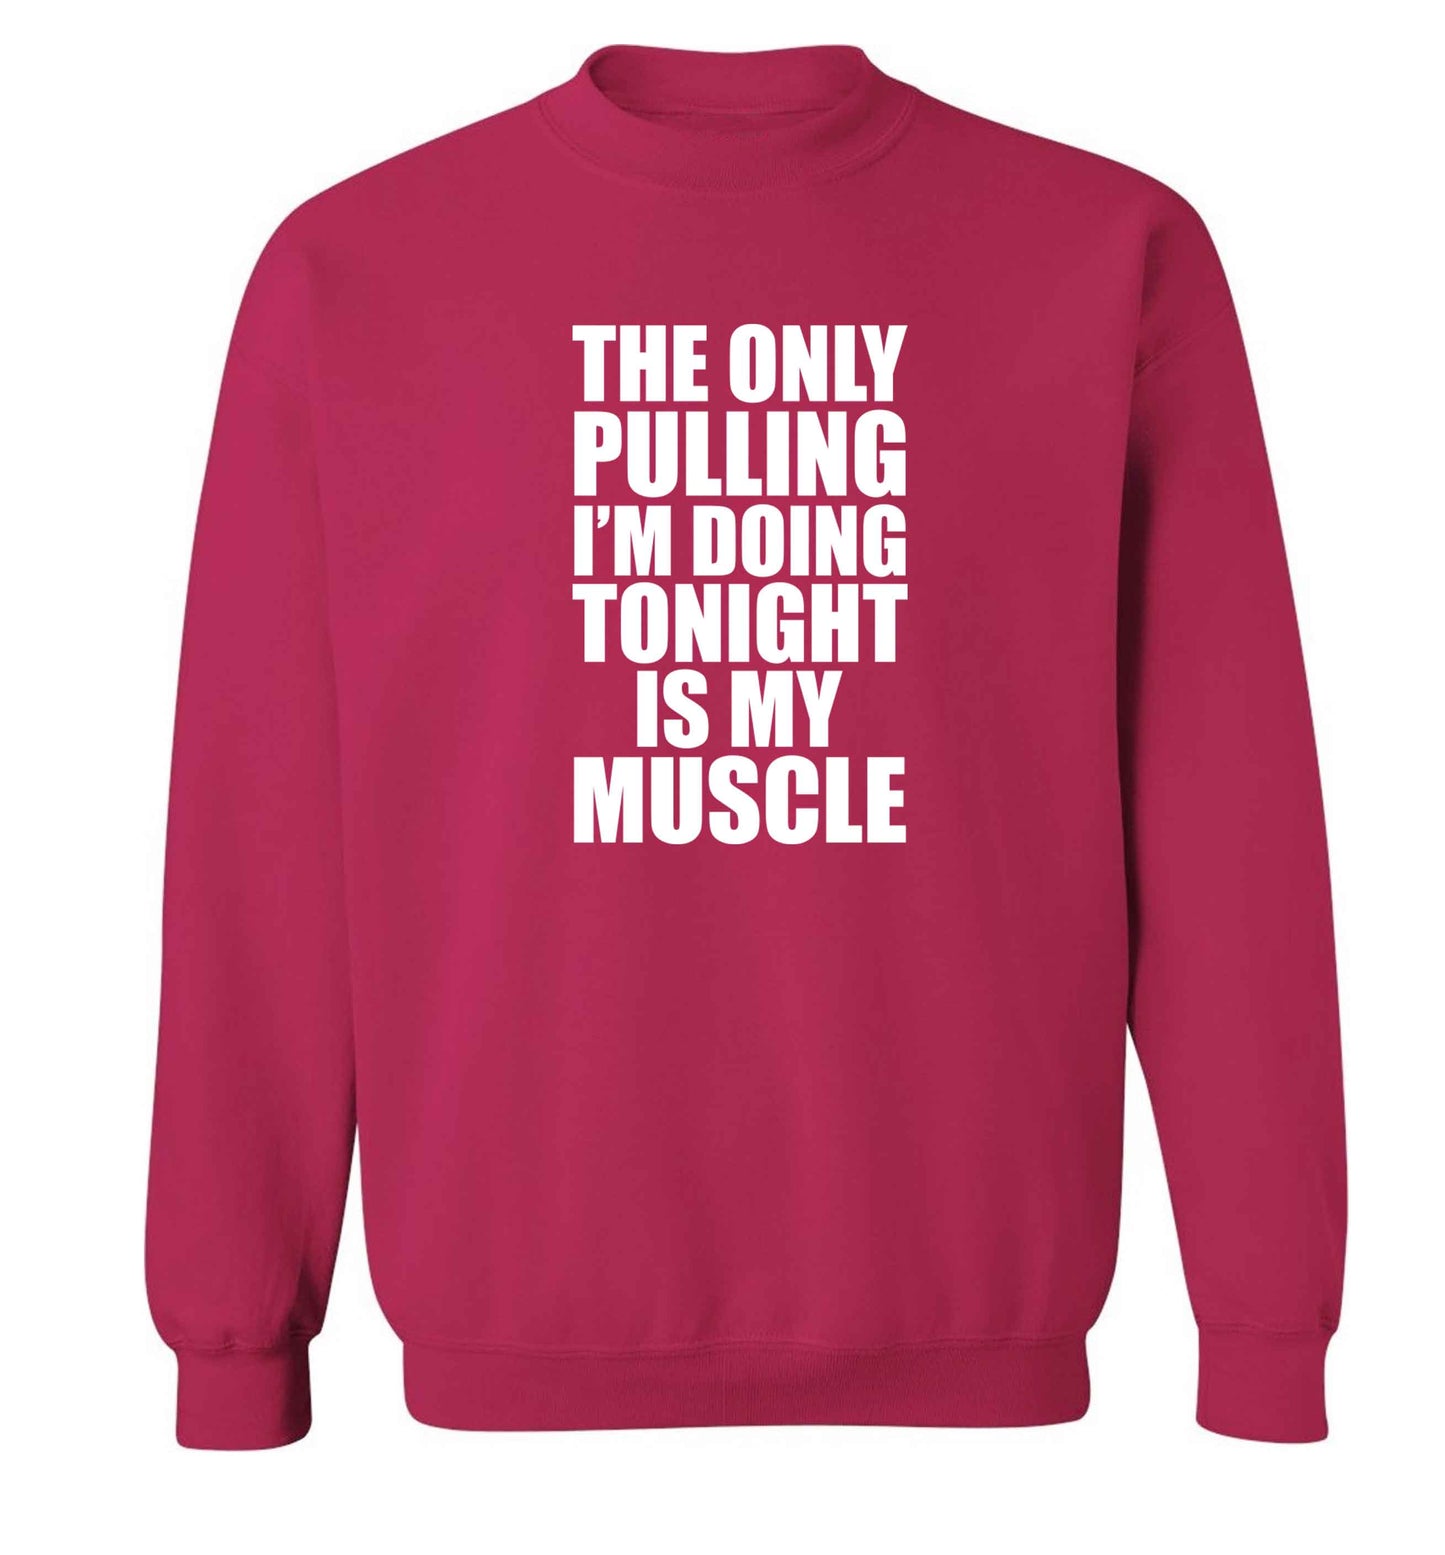 The only pulling I'm doing tonight is my muscle adult's unisex pink sweater 2XL